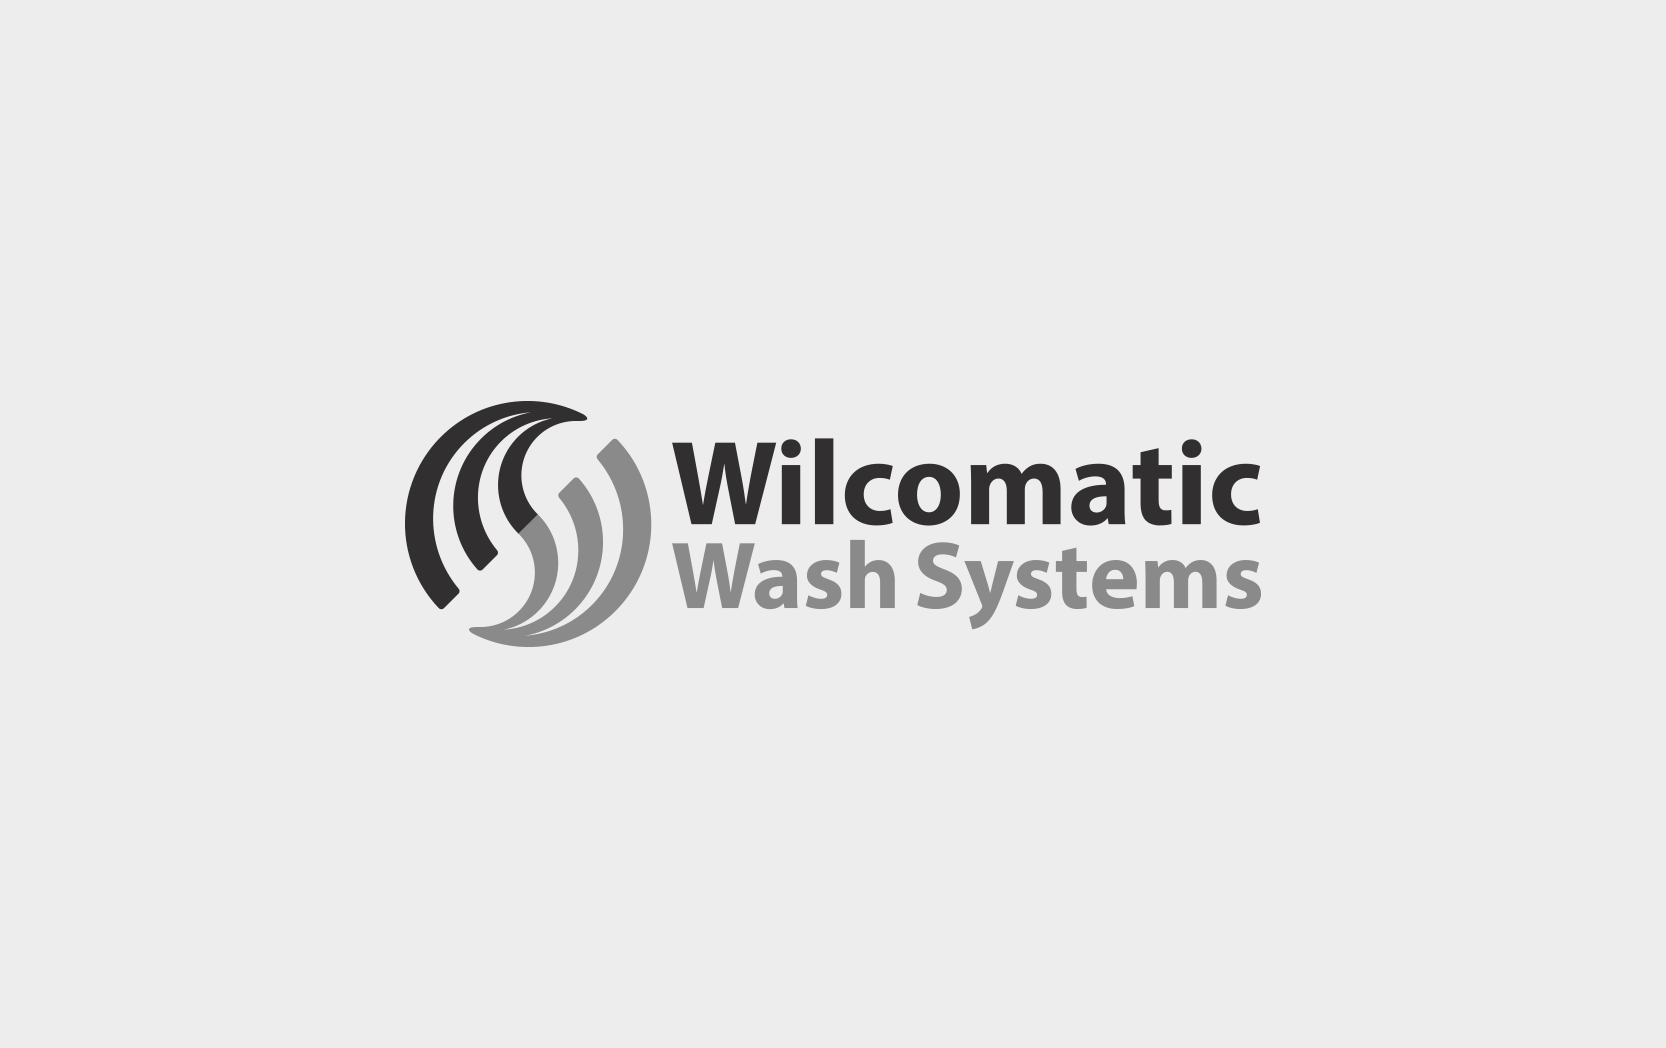 Wilcomatic Wash Systems